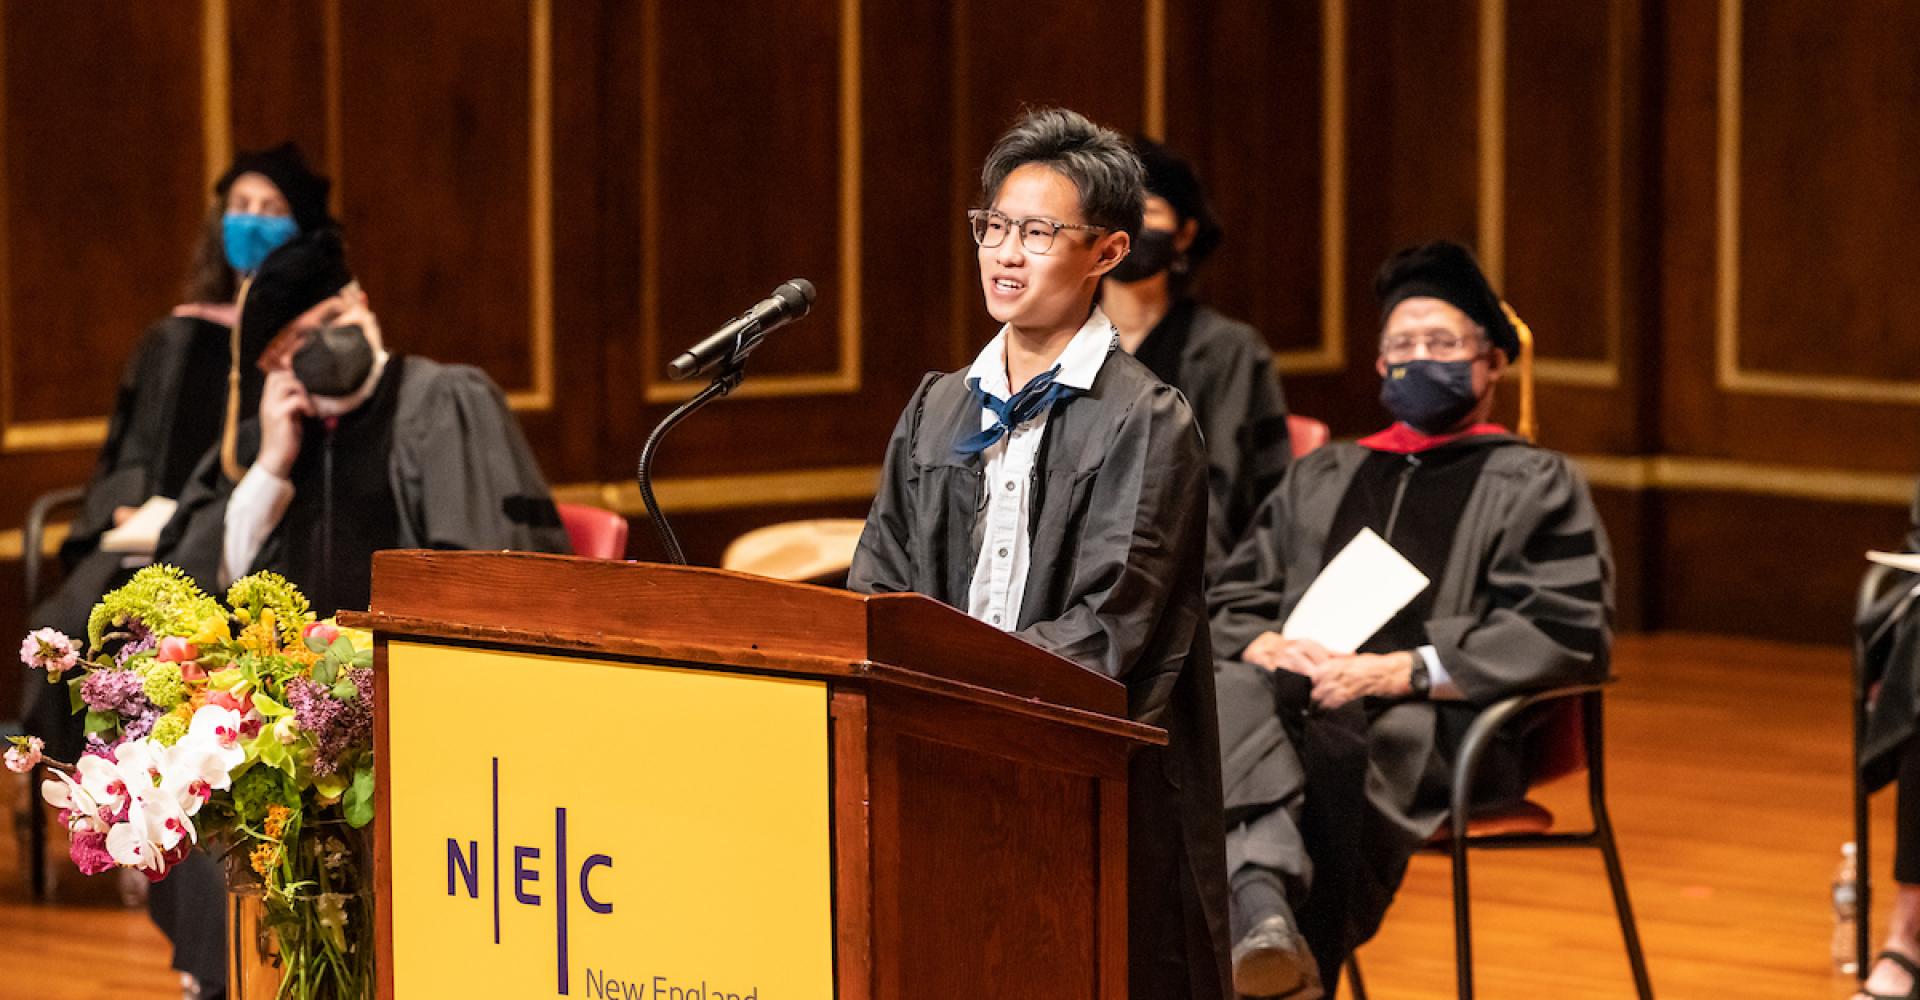 Robbie Bui speaks at a lectern from the Jordan Hall stage during Commencement 2021.